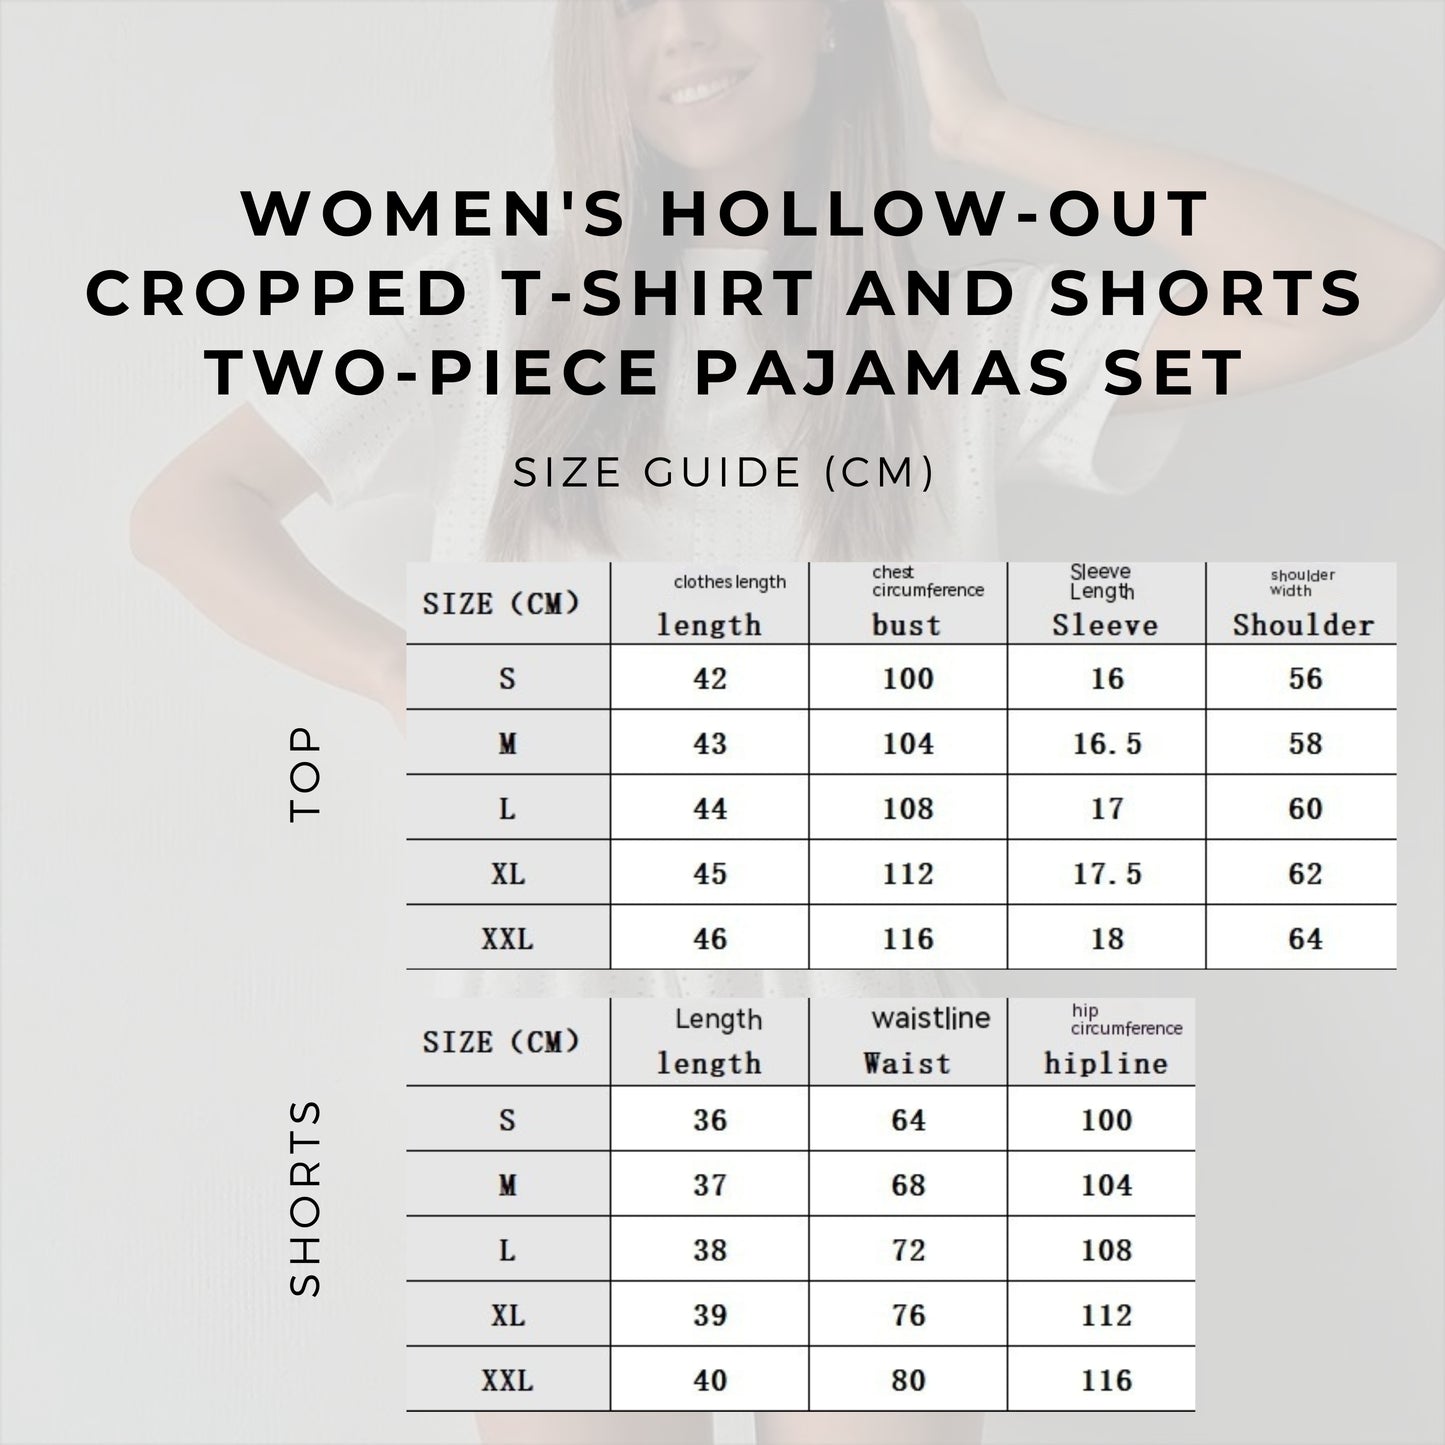 Women's Hollow-out Cropped T-Shirt and Shorts Two-piece Pajamas Set